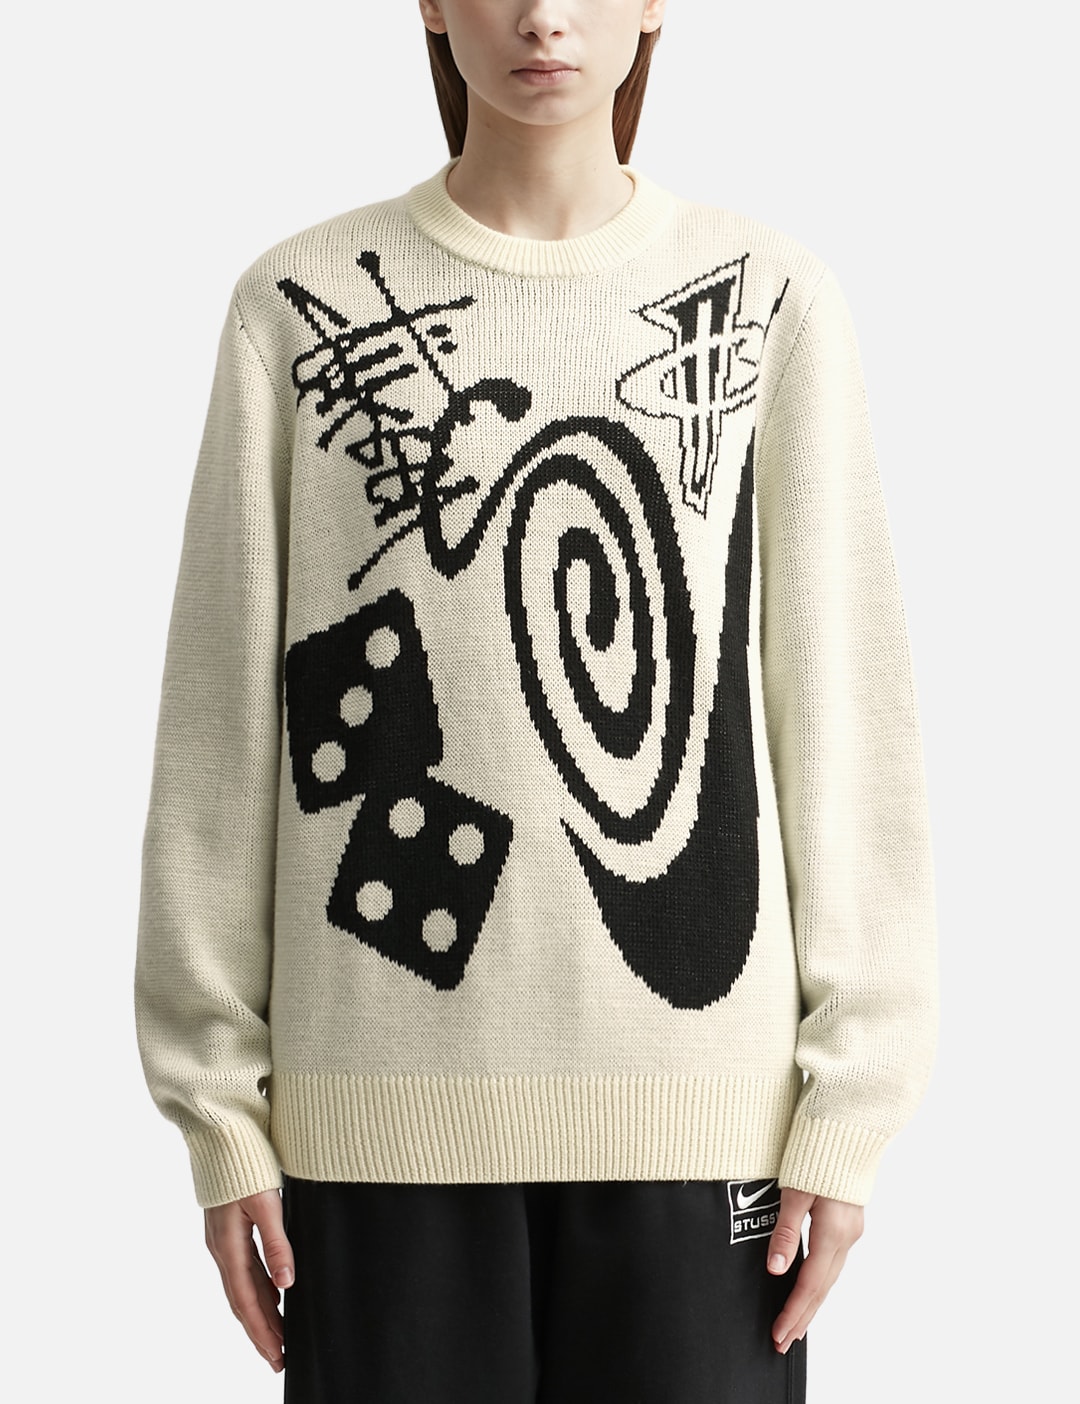 Nike - Nike x Stüssy Knit Sweater | HBX - Globally Curated Fashion and ...